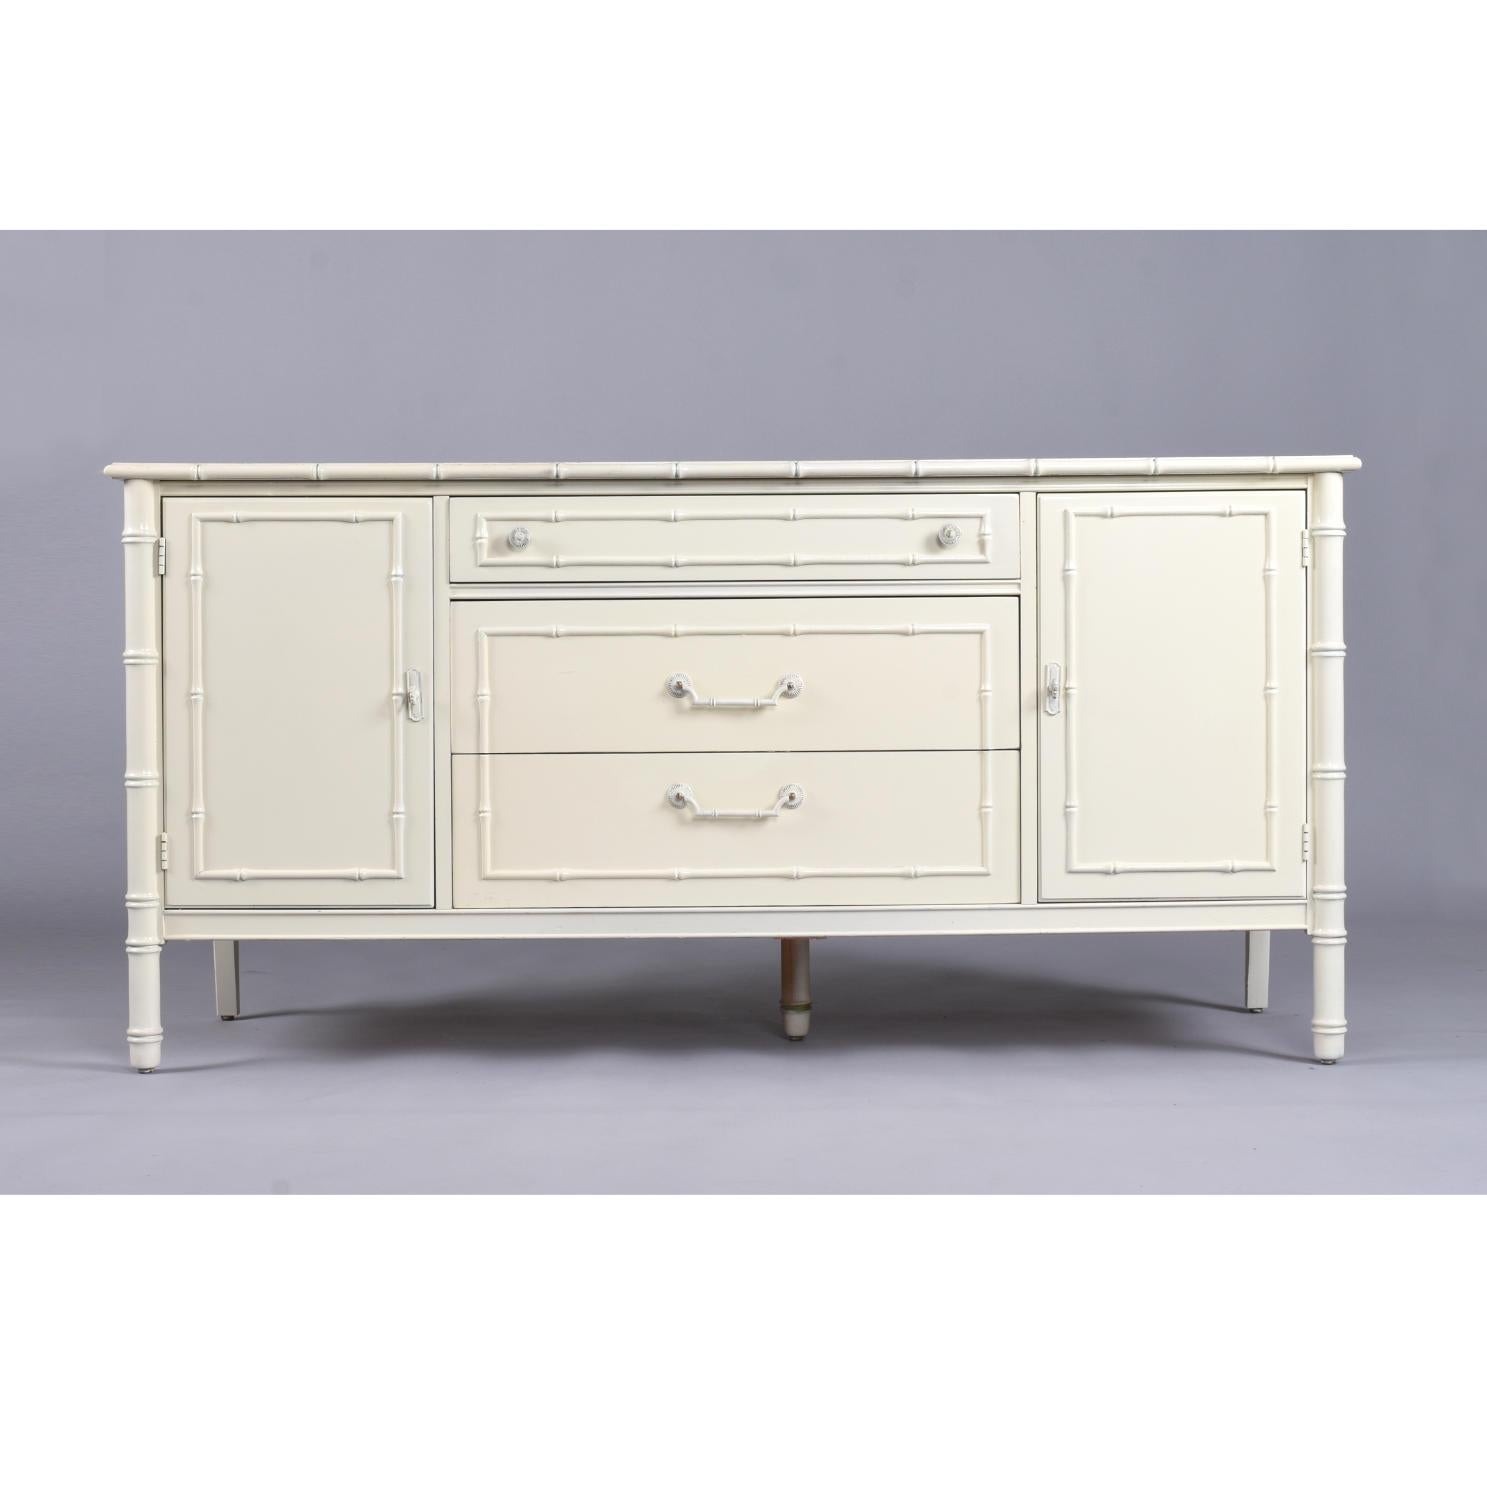 Hollywood Regency Thomasville Allegro Cream Color Faux Bamboo Fretwork Credenza